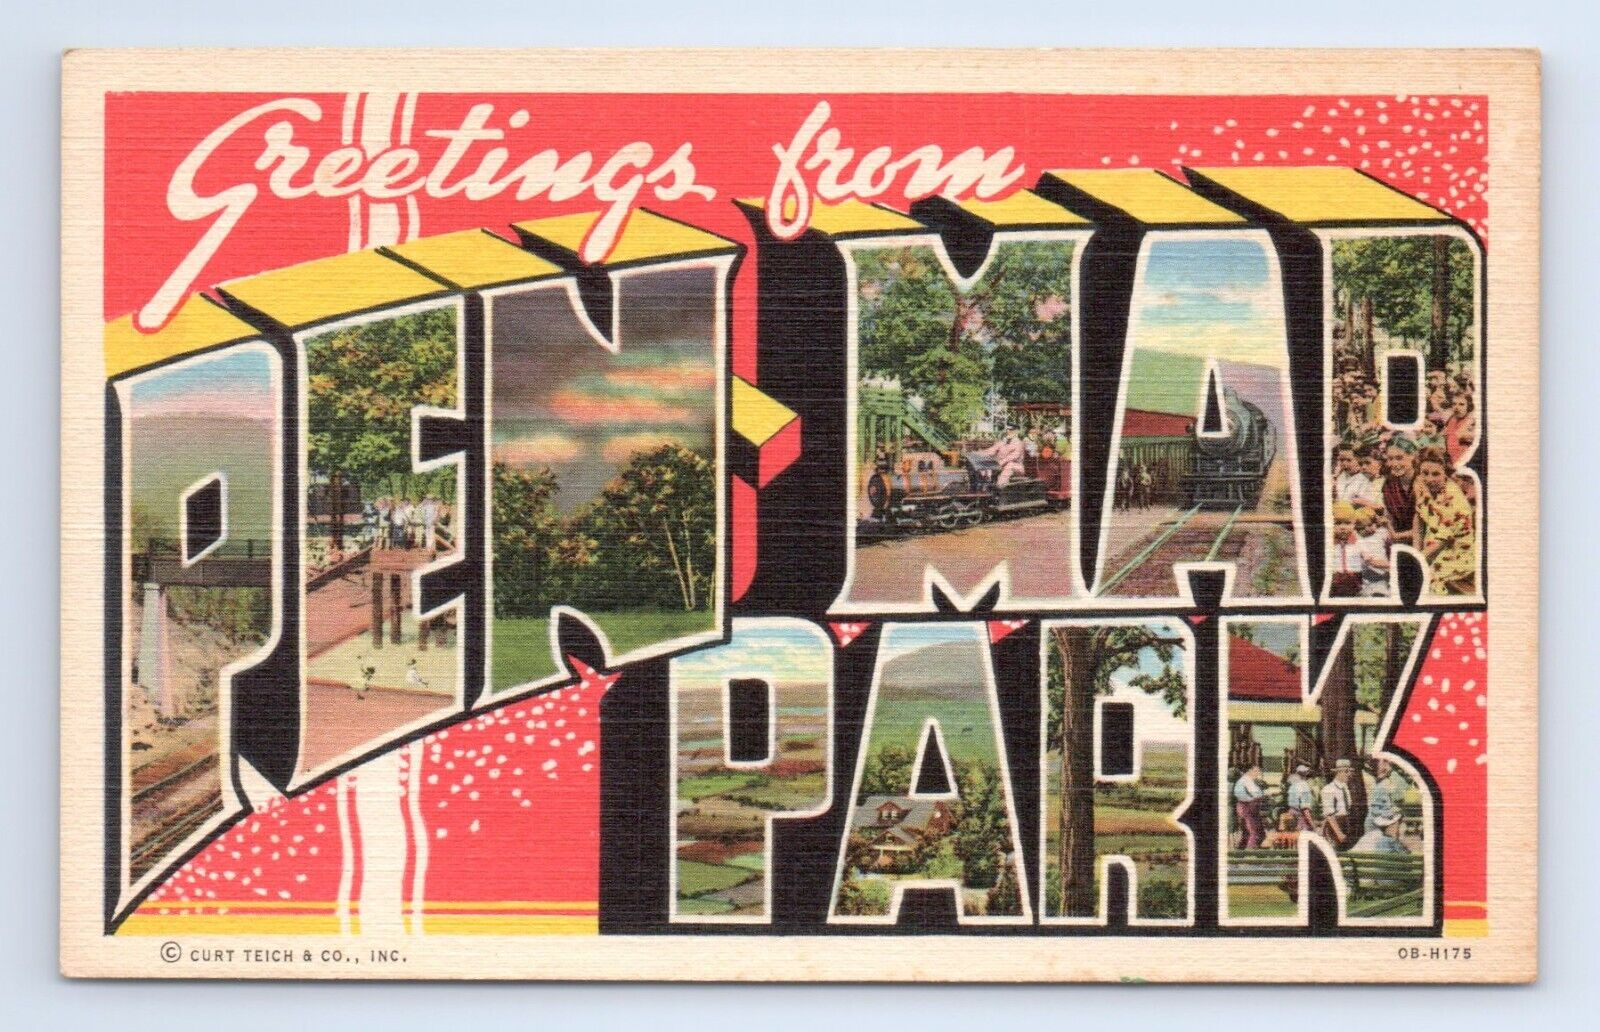 Large Letter Greetings from Pen-Mar Park Pennsylvania Postcard VTG PA Curt Teich